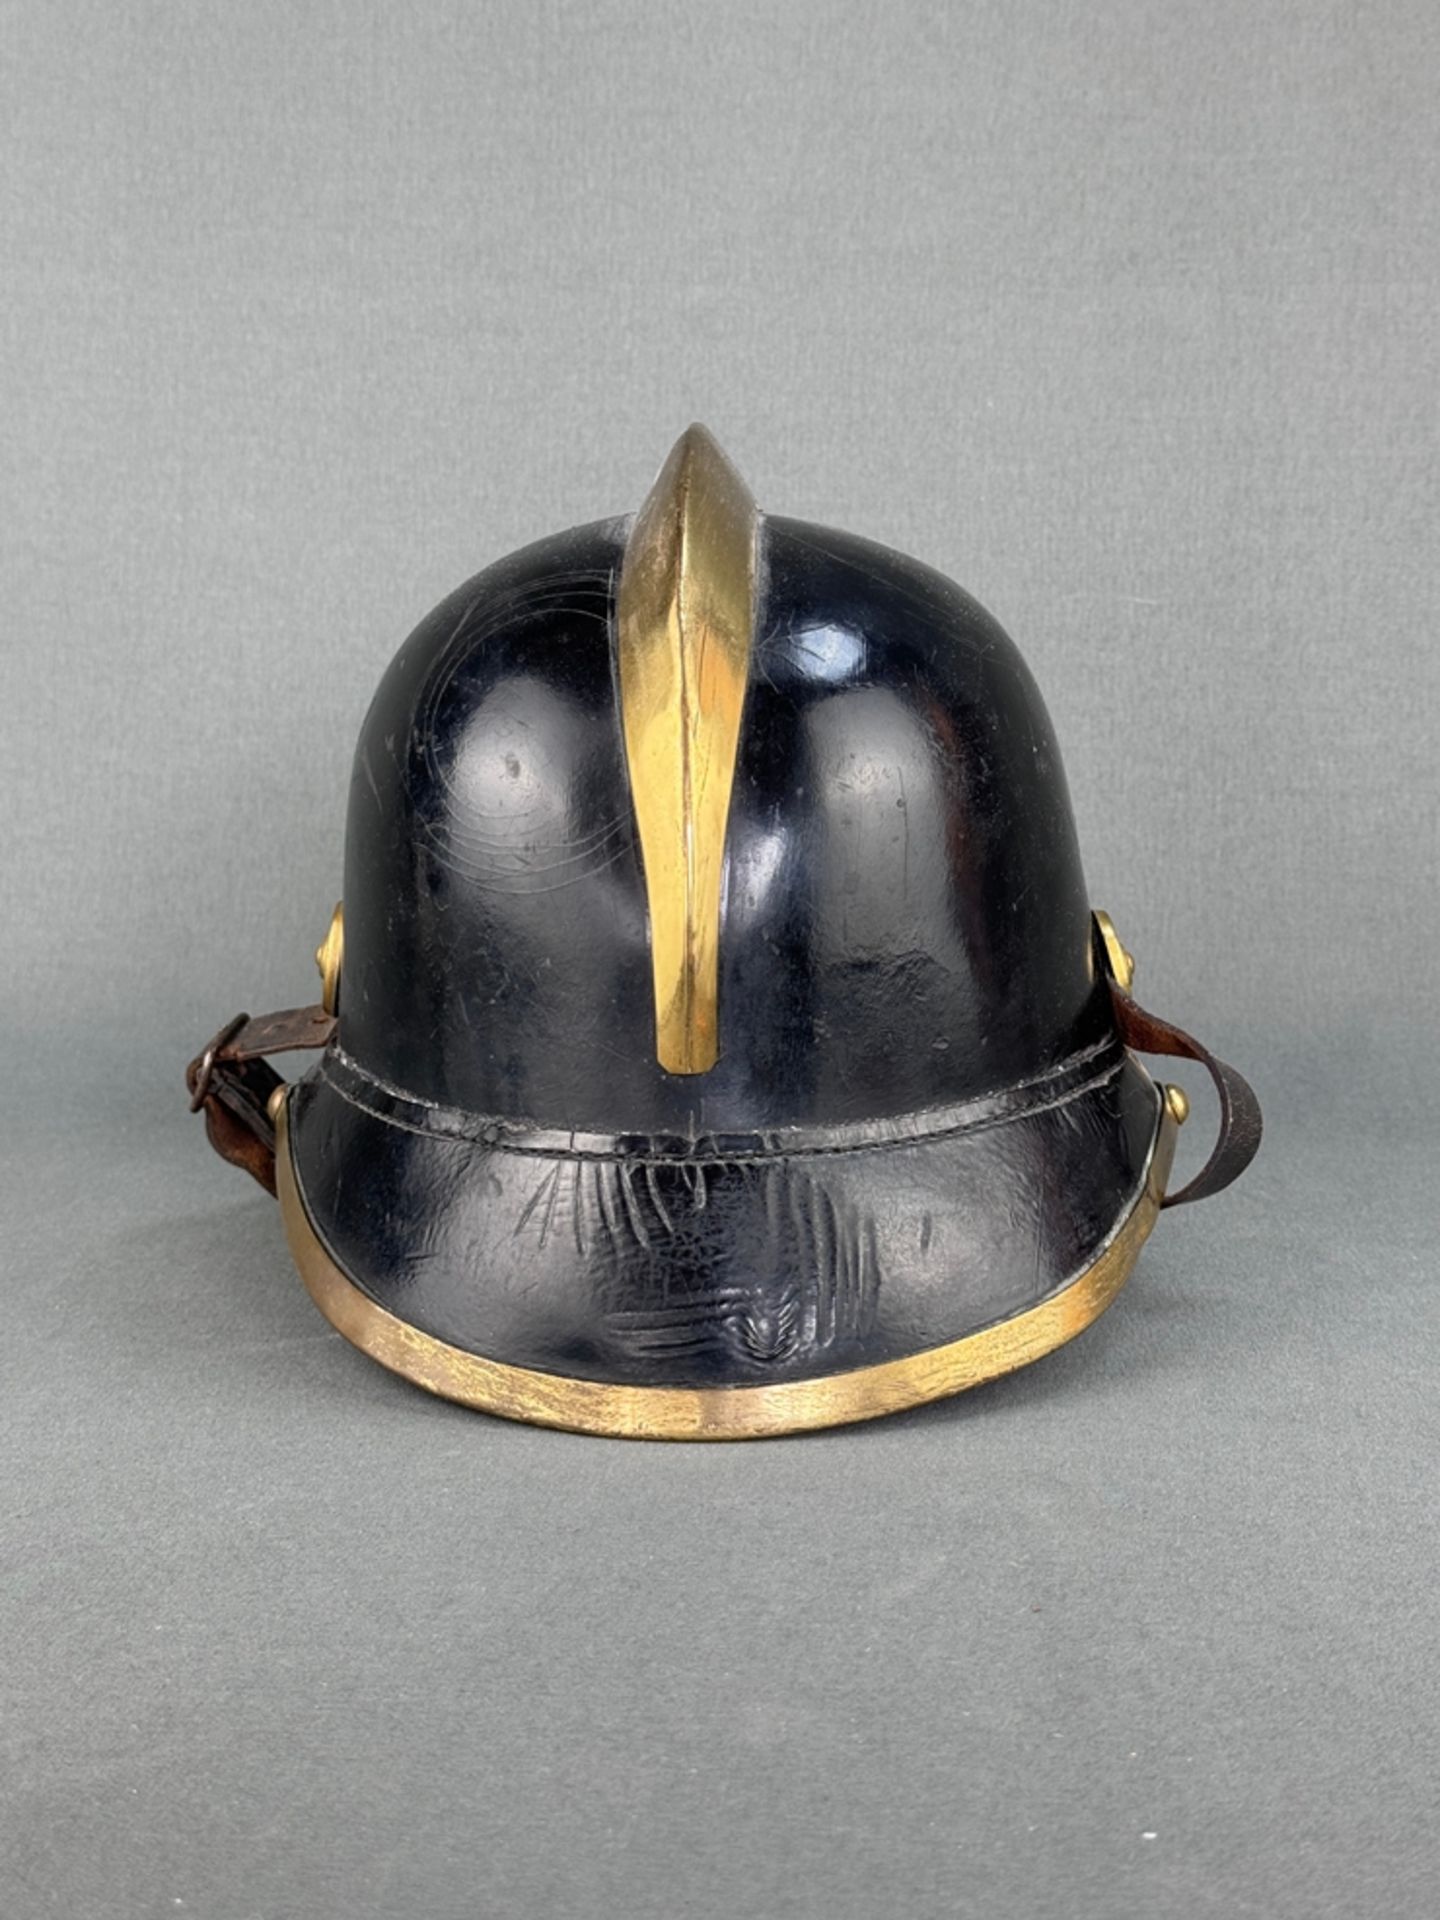 Fire brigade helmet, probably from southern Germany around 1920, covered with black leather - Image 2 of 3